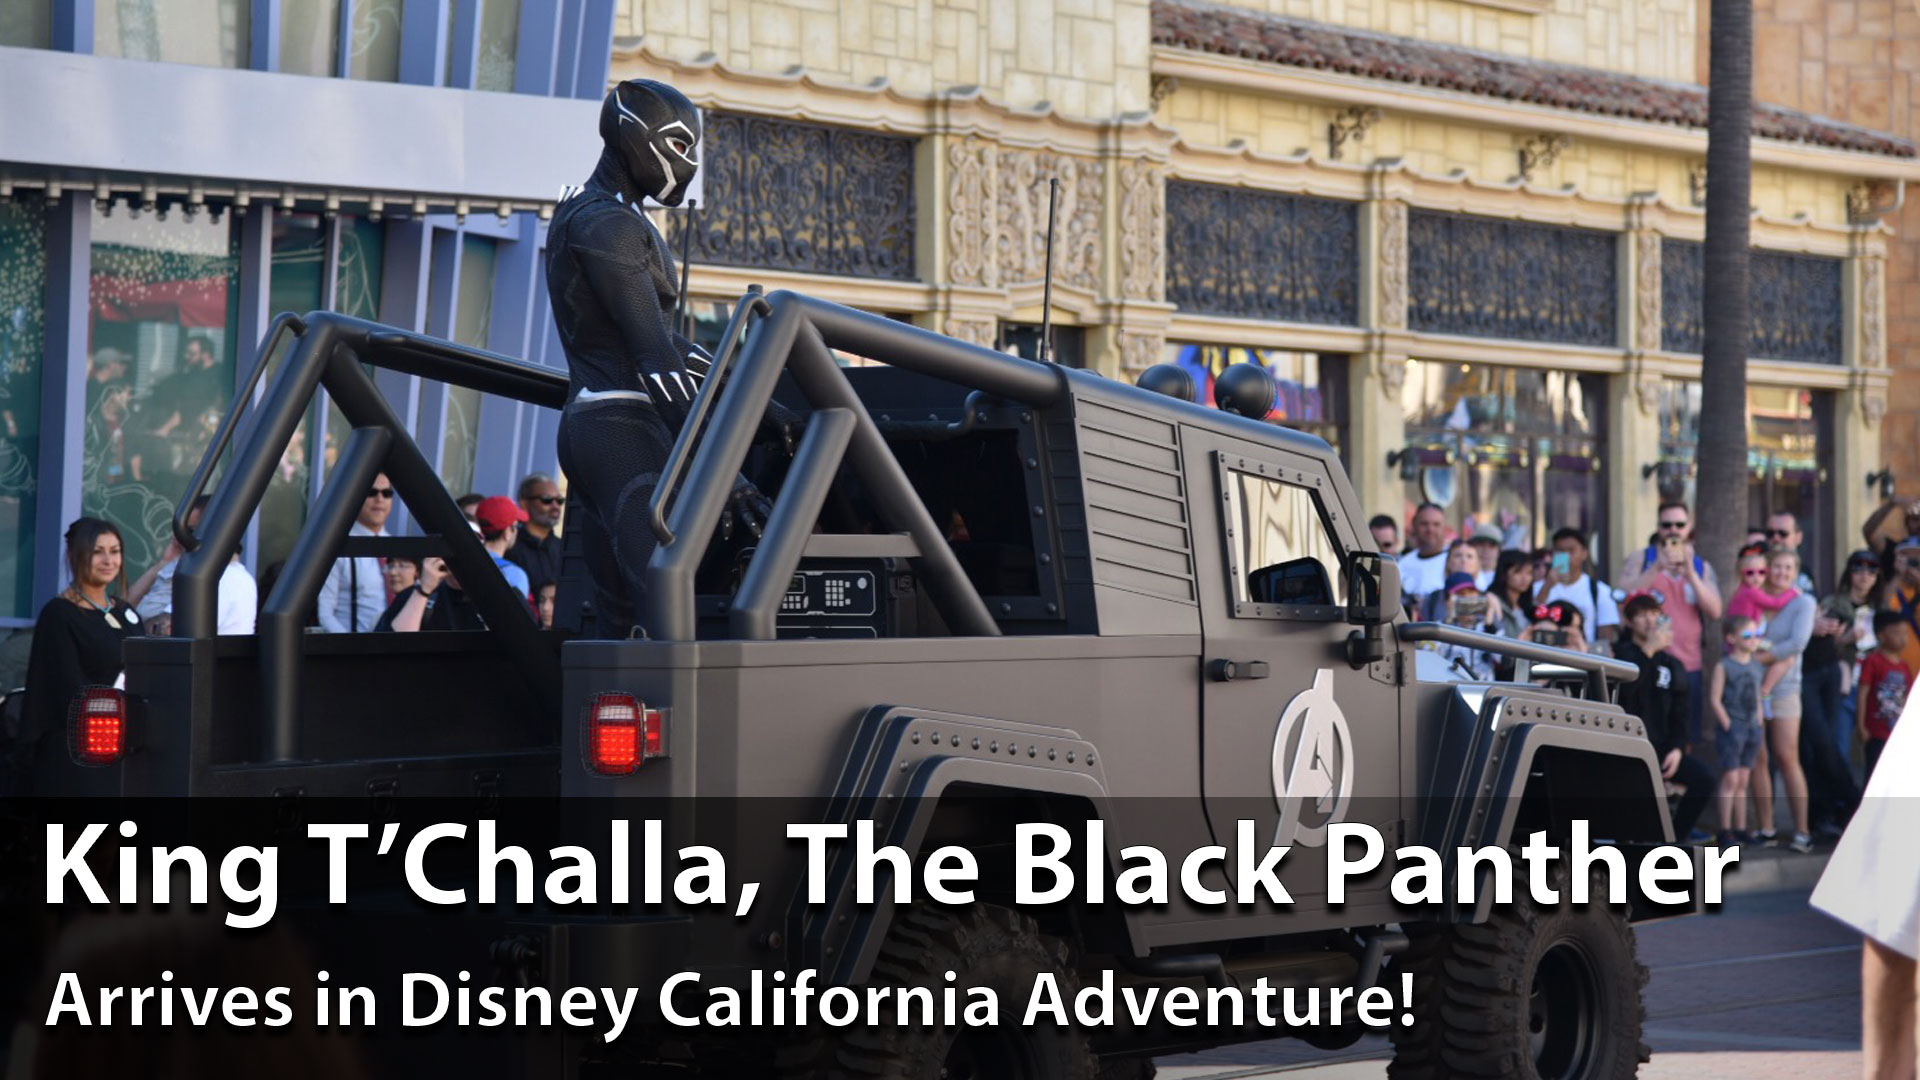 King T'Challa, the Black Panther, Arrives at Disney California Adventure